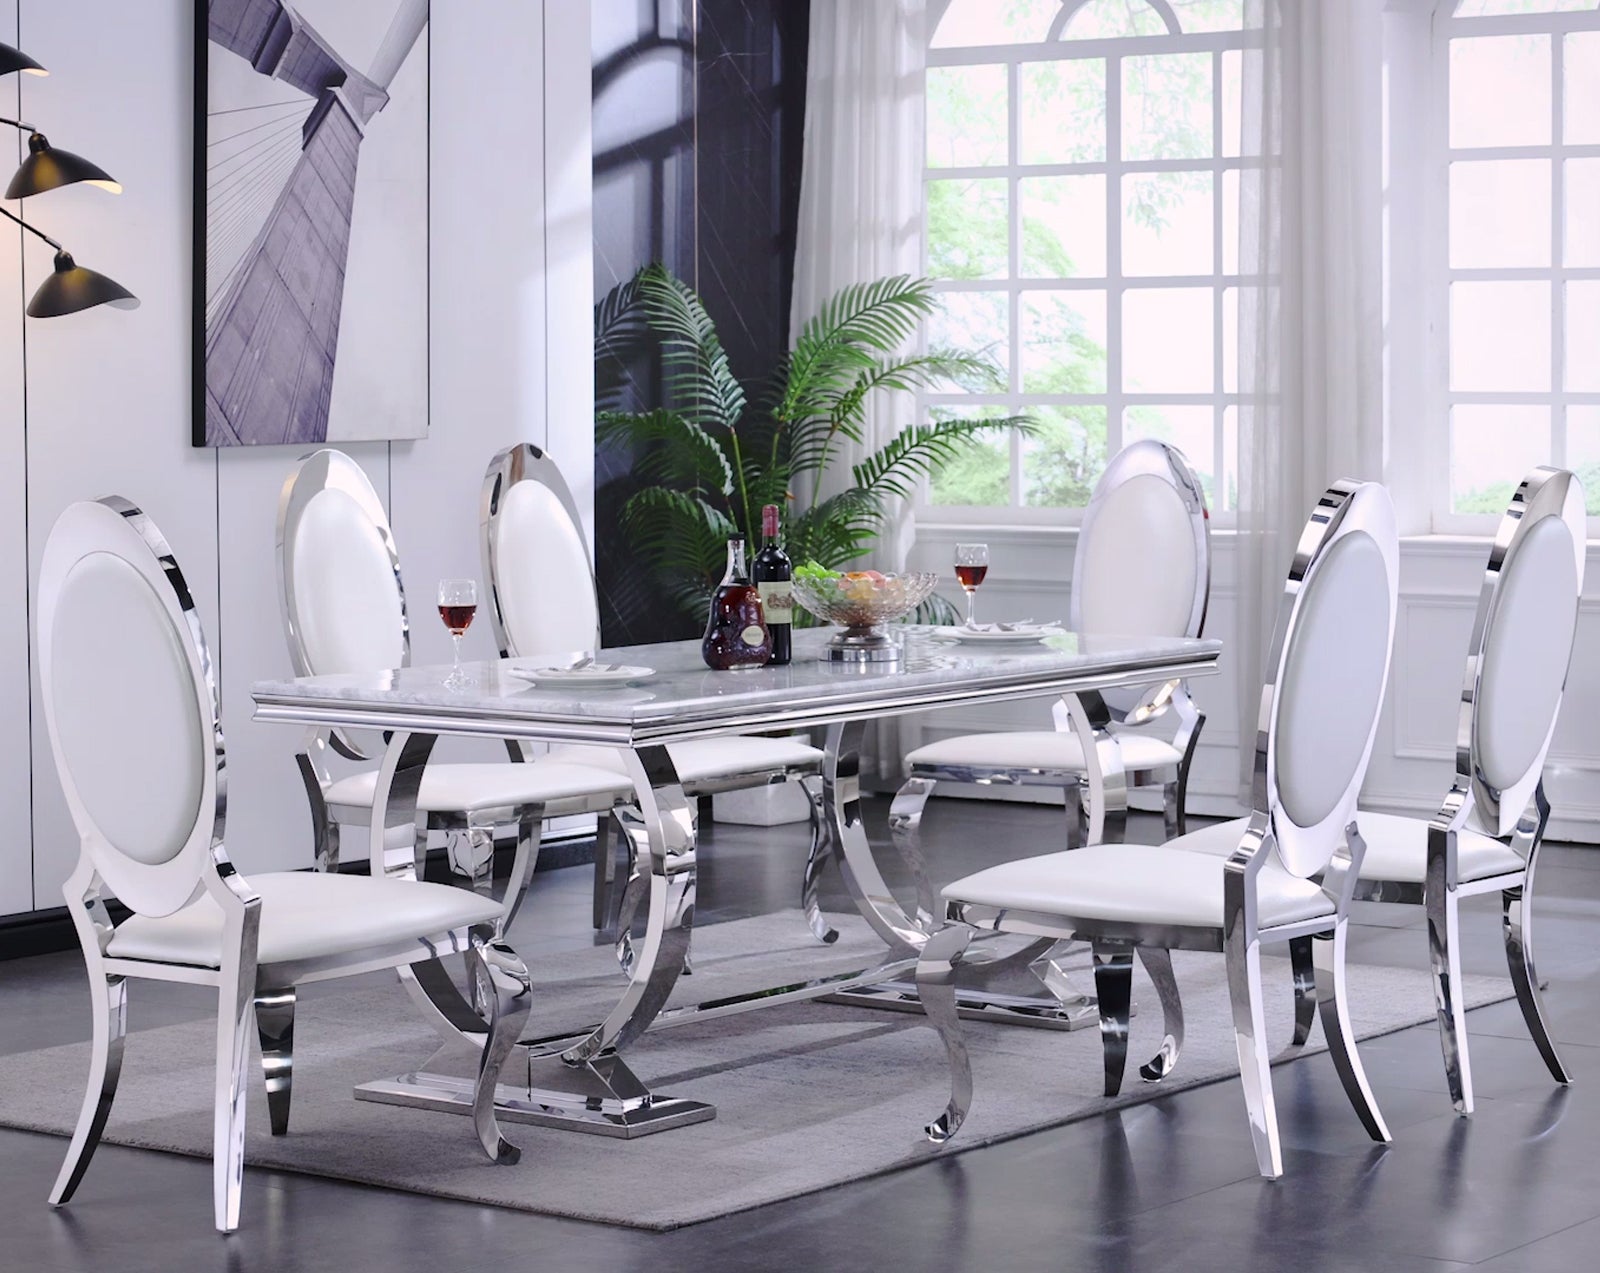 Modern White Leather Dining Chairs: The Epitome of Elegance and Comfort